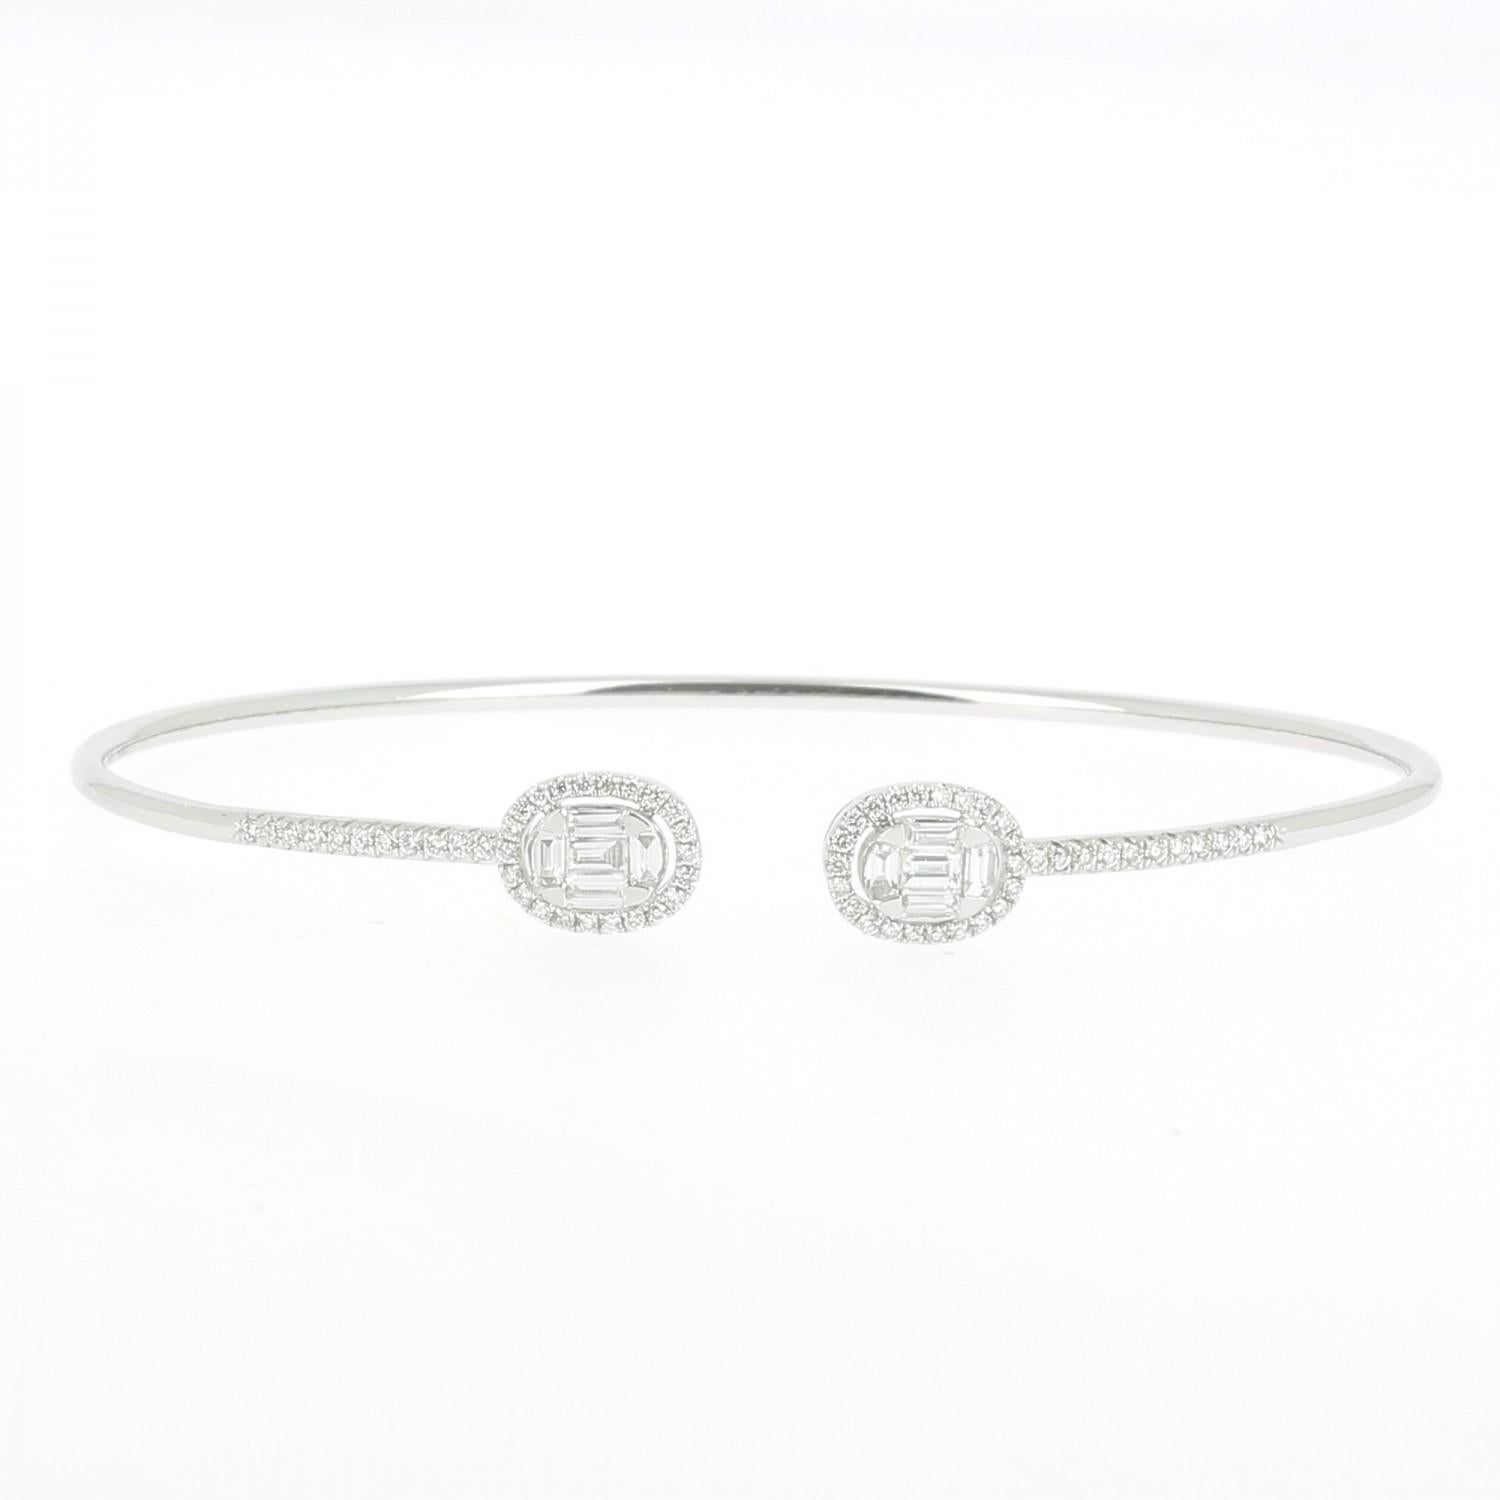 A wonderful Diamond Bangles Bracelet set with Rounds Diamond and Baguettes Diamonds.
The Bracelet counts 10 Baguettes Diamonds and 66 Round Diamond weighing totally 0.51 Carats.
The Diamonds are GVS quality.
The Bangle Bracelet is 18K White